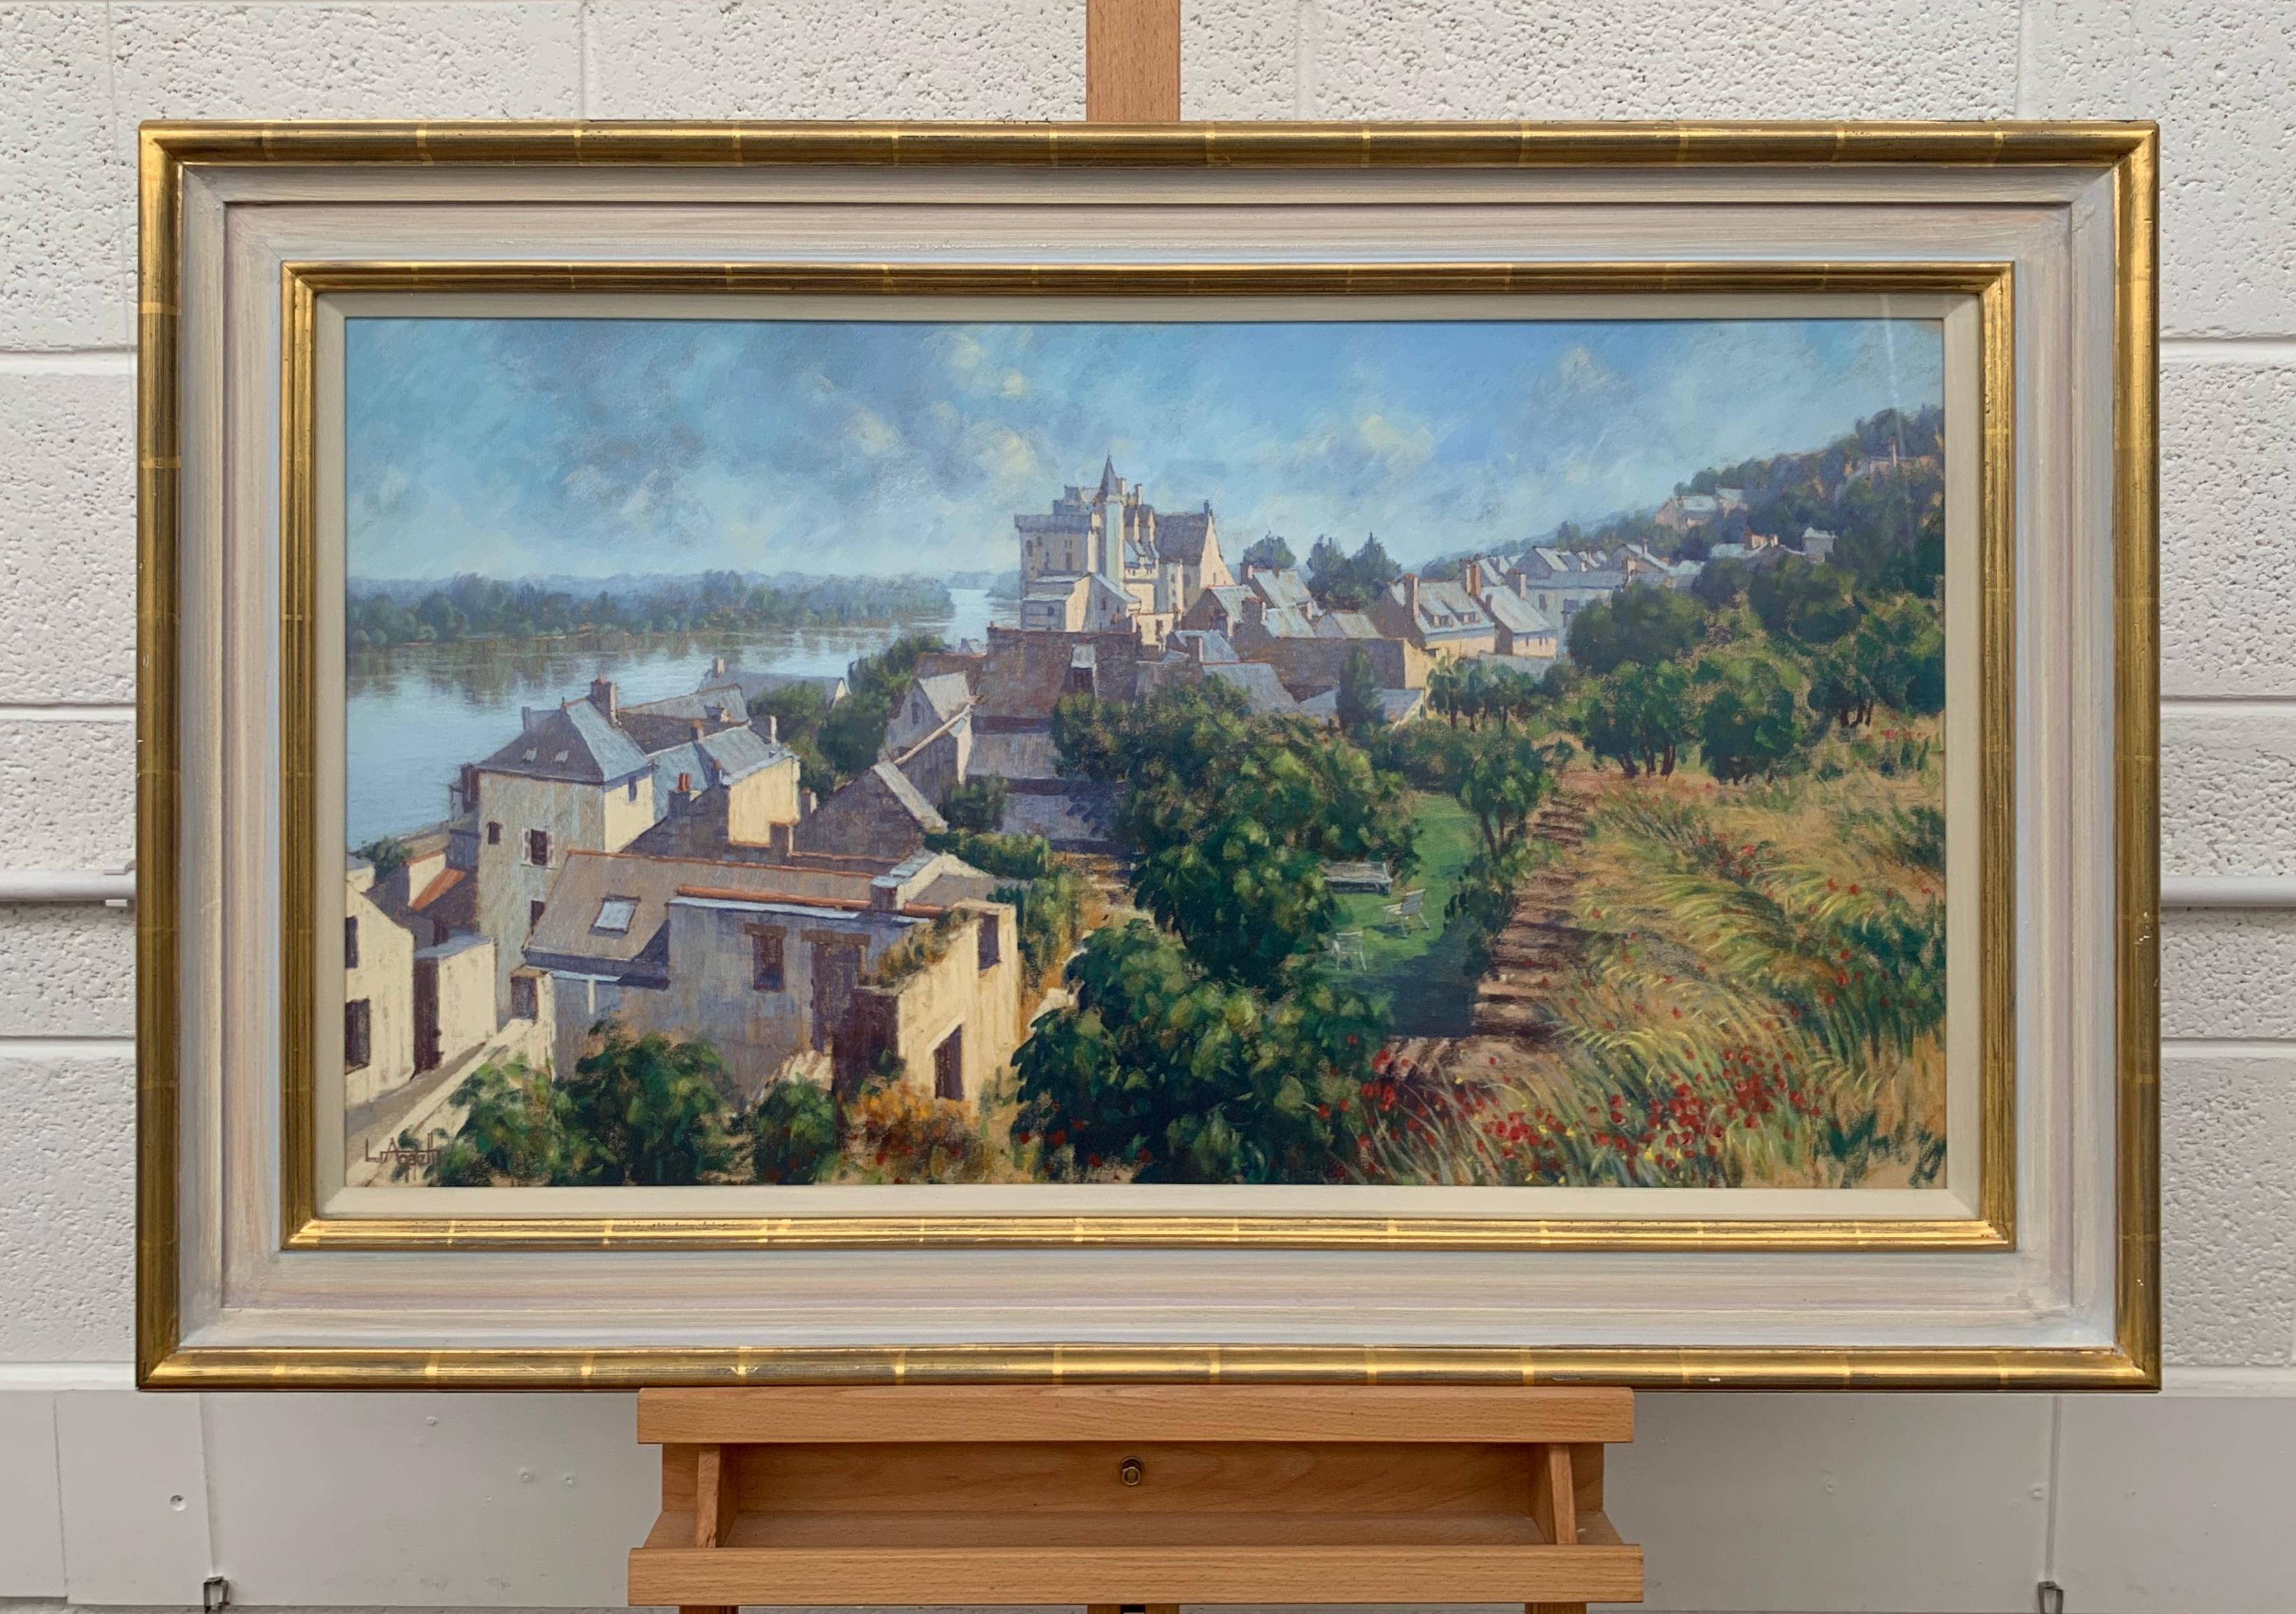 The Loire Valley Montsoreau France Landscape Pastel Art by British 20th Century Artist Lionel Aggett (1938-2009).
Signed front and rear, framed behind glass in a high quality gold and cream shabby chic moulding. 

Art measures 32 x 16 inches
Frame